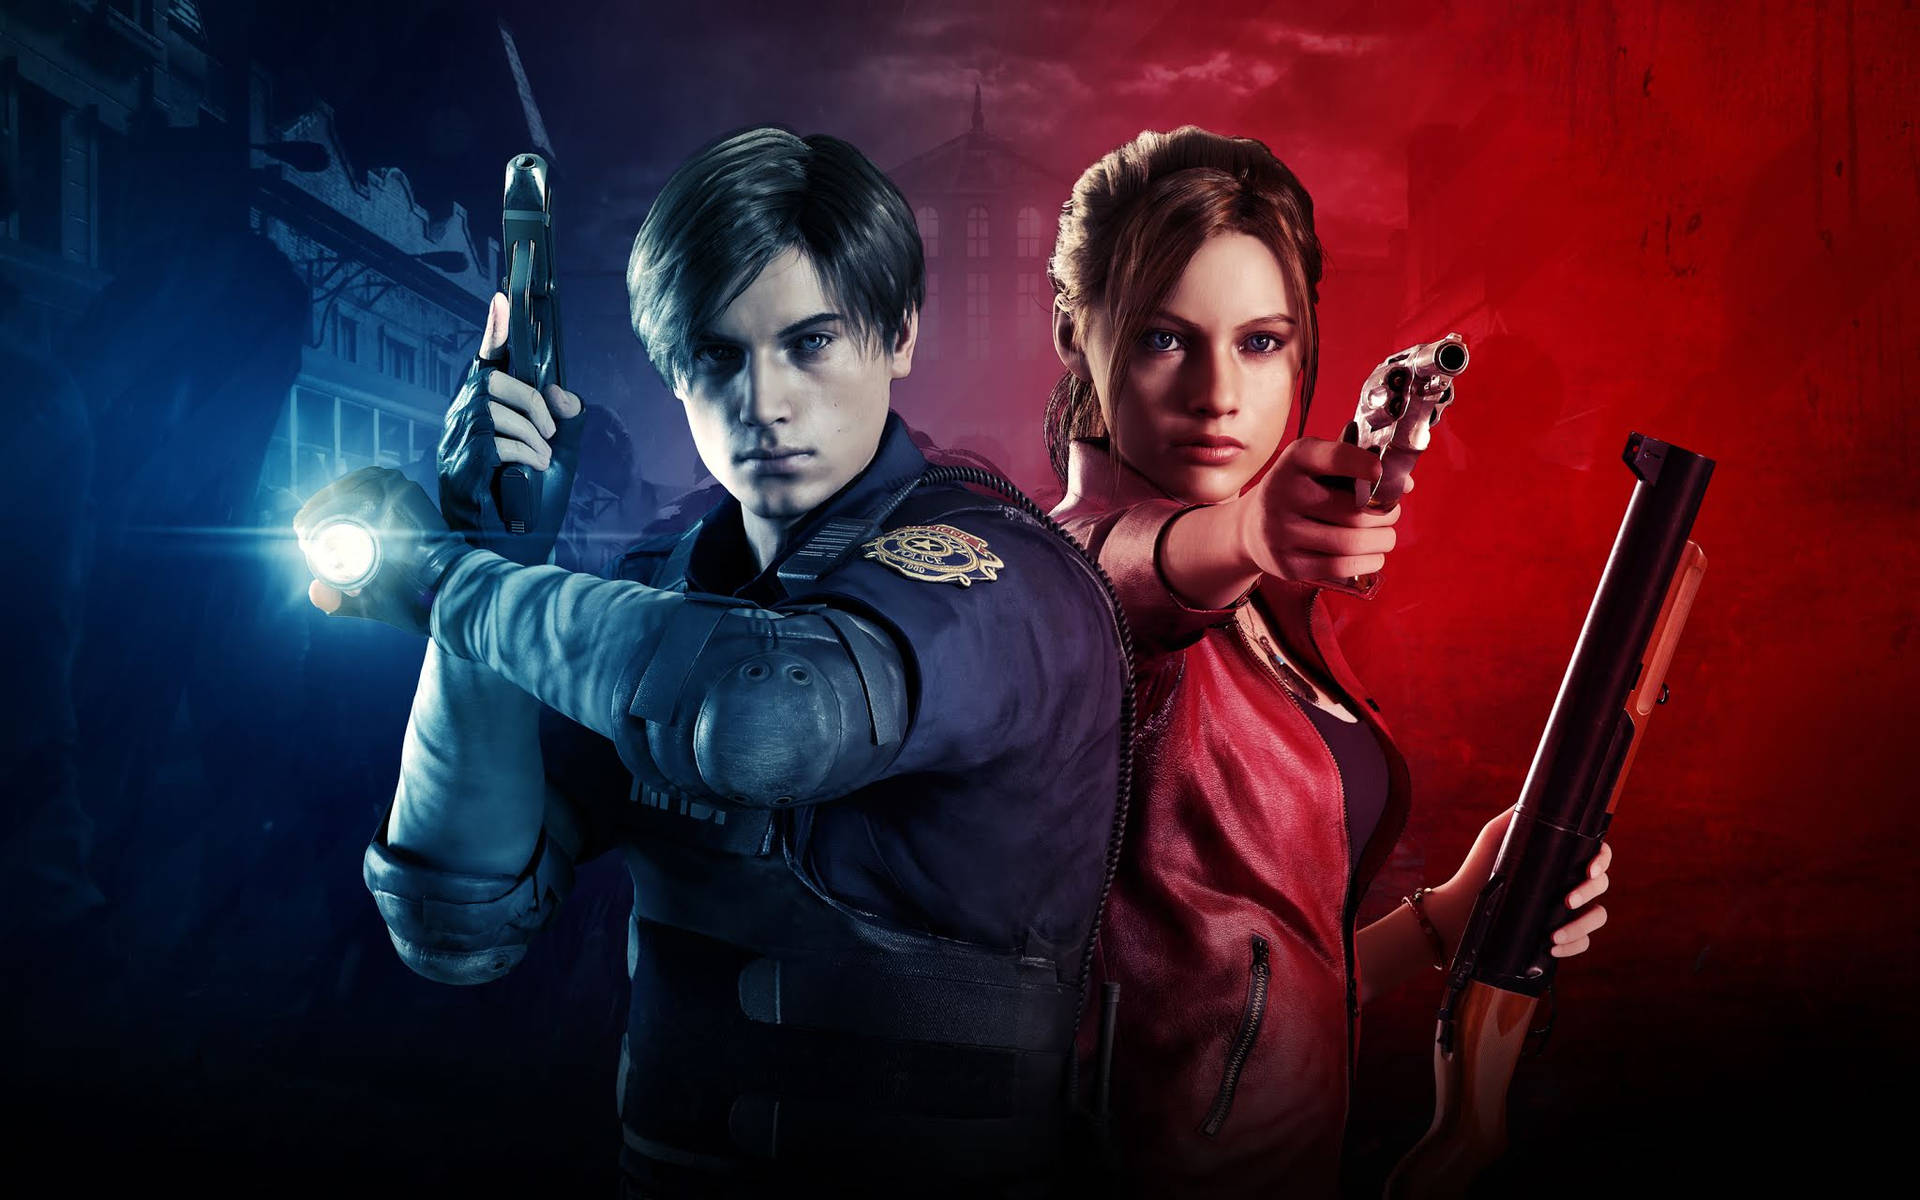 Claire and Leon battling a powerful undead enemy in the Resident Evil 2 remake Wallpaper